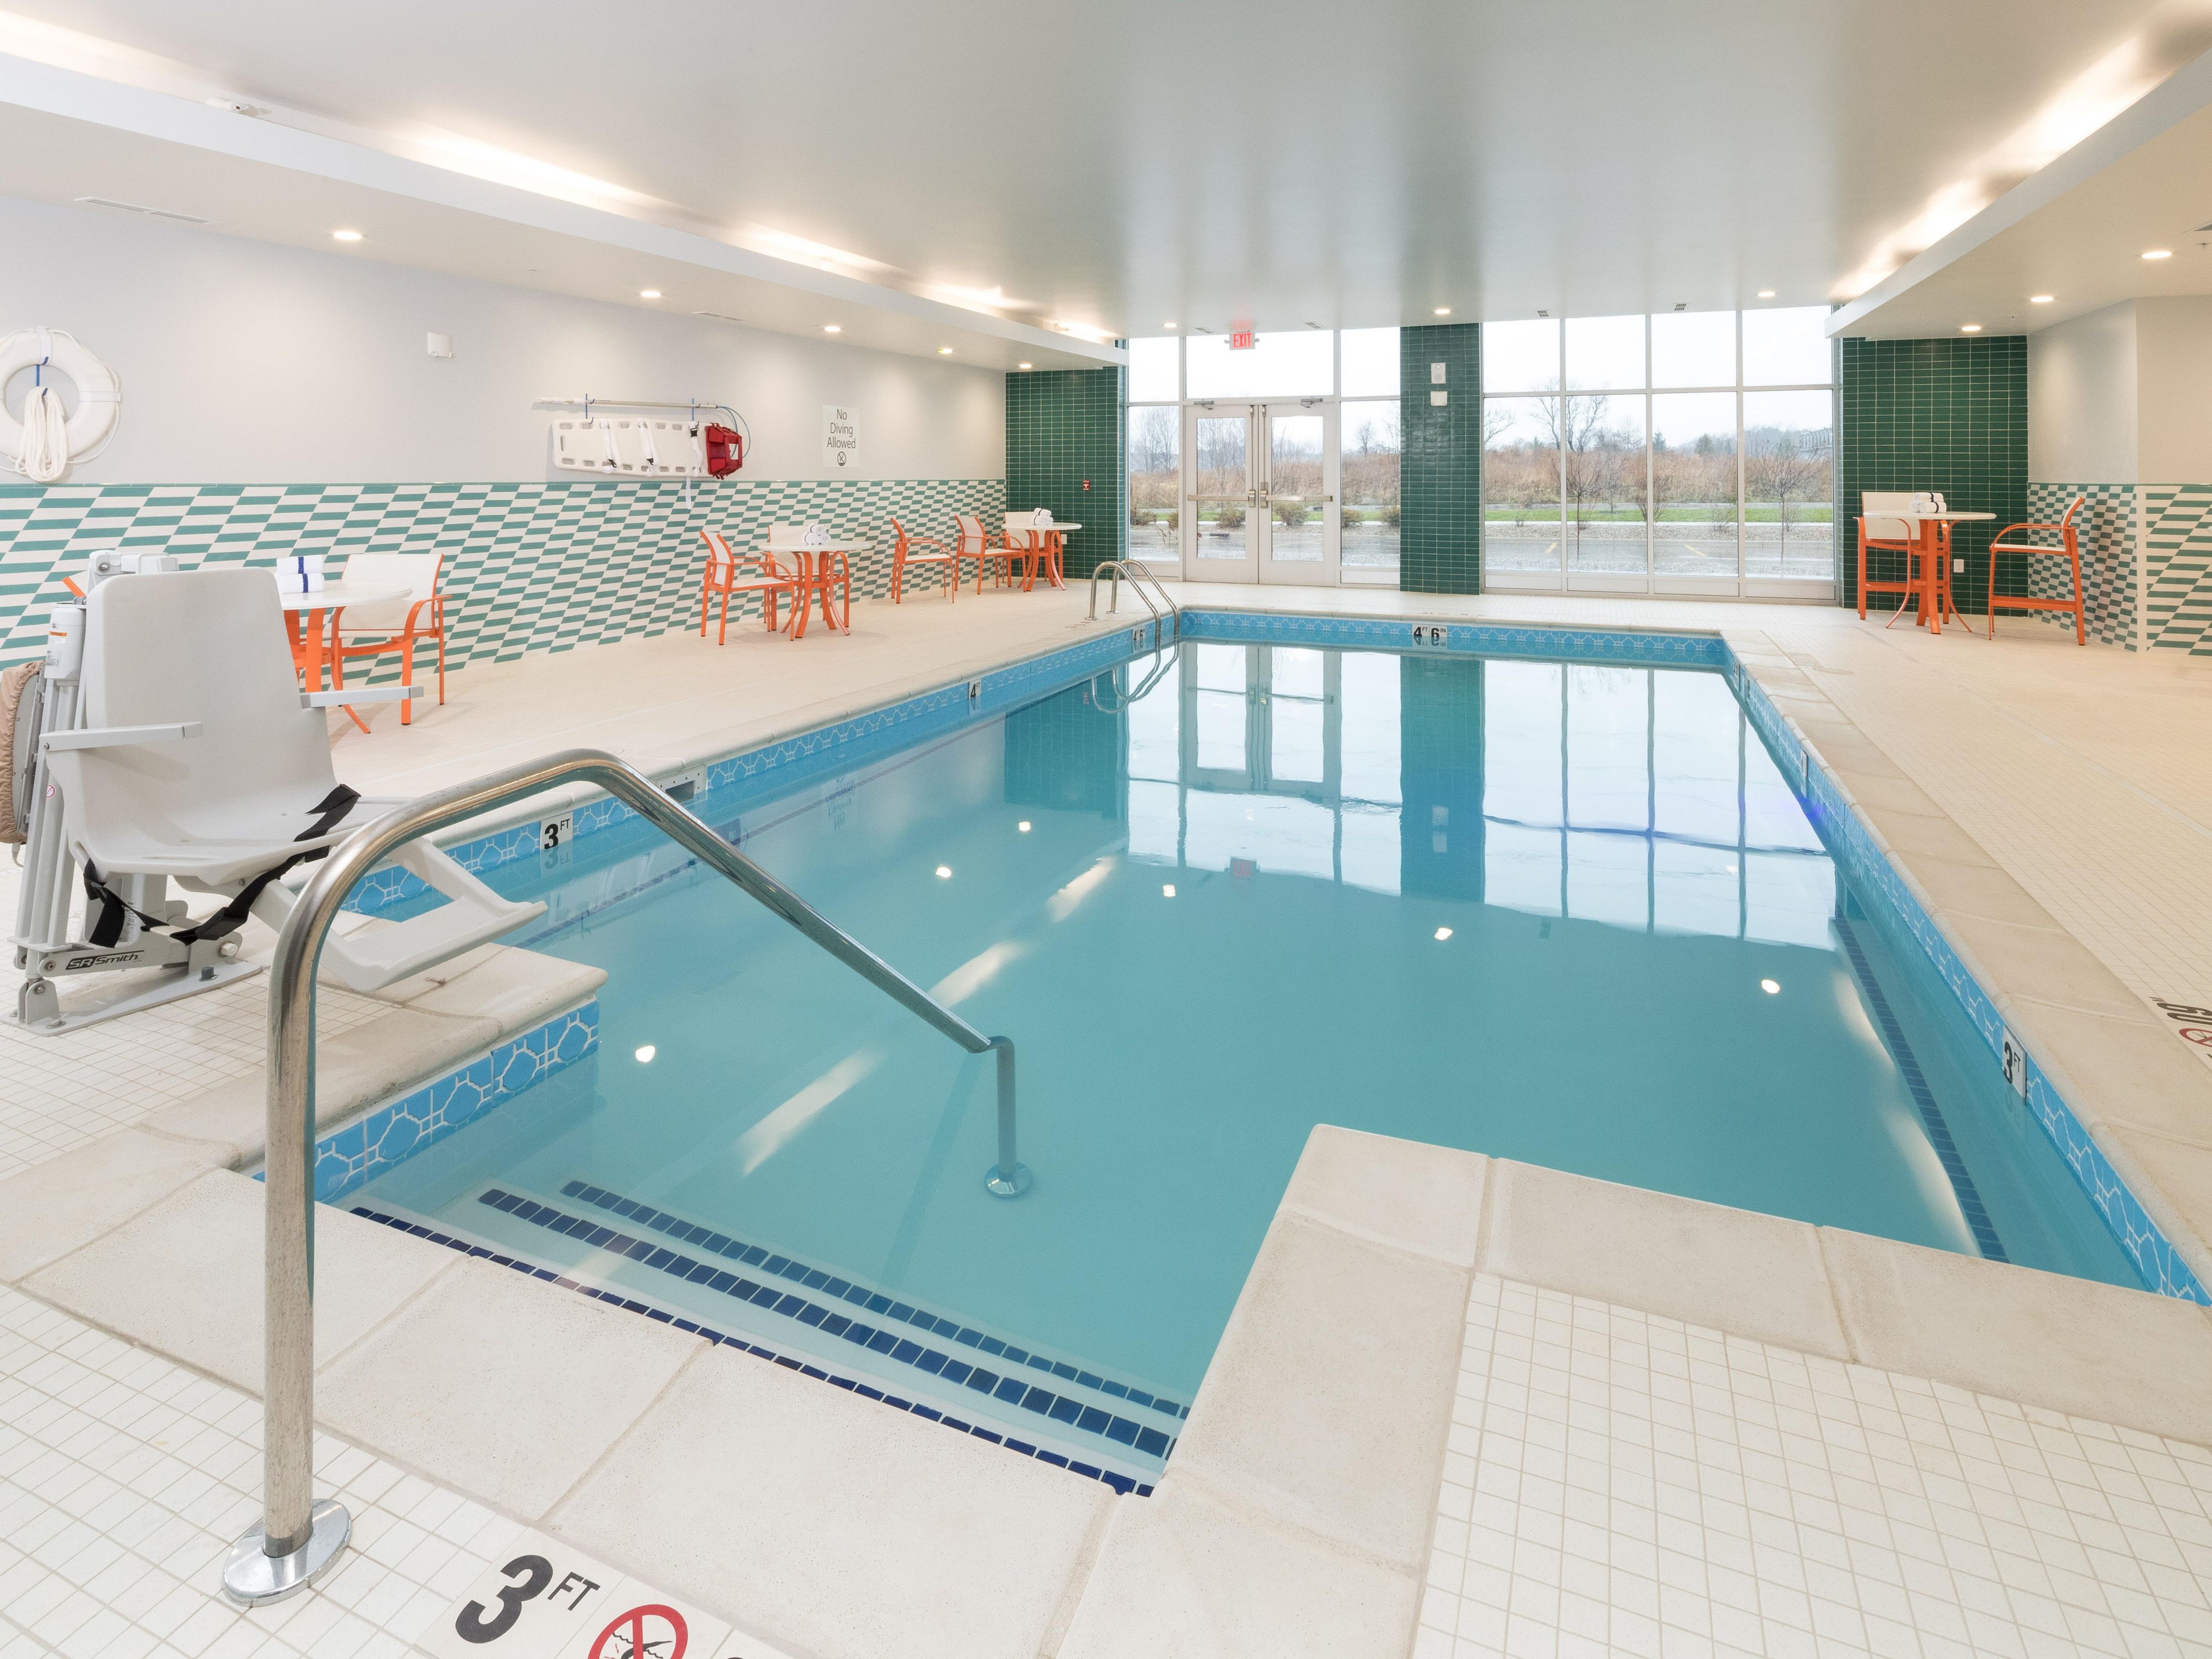 Bring the kids down to our large indoor pool with a three foot shallow end perfect for splashing around. Dive into the deep end and swim a few laps or cool off after a workout in the gym. Relax in our poolside chairs and unwind with your favorite streaming music.